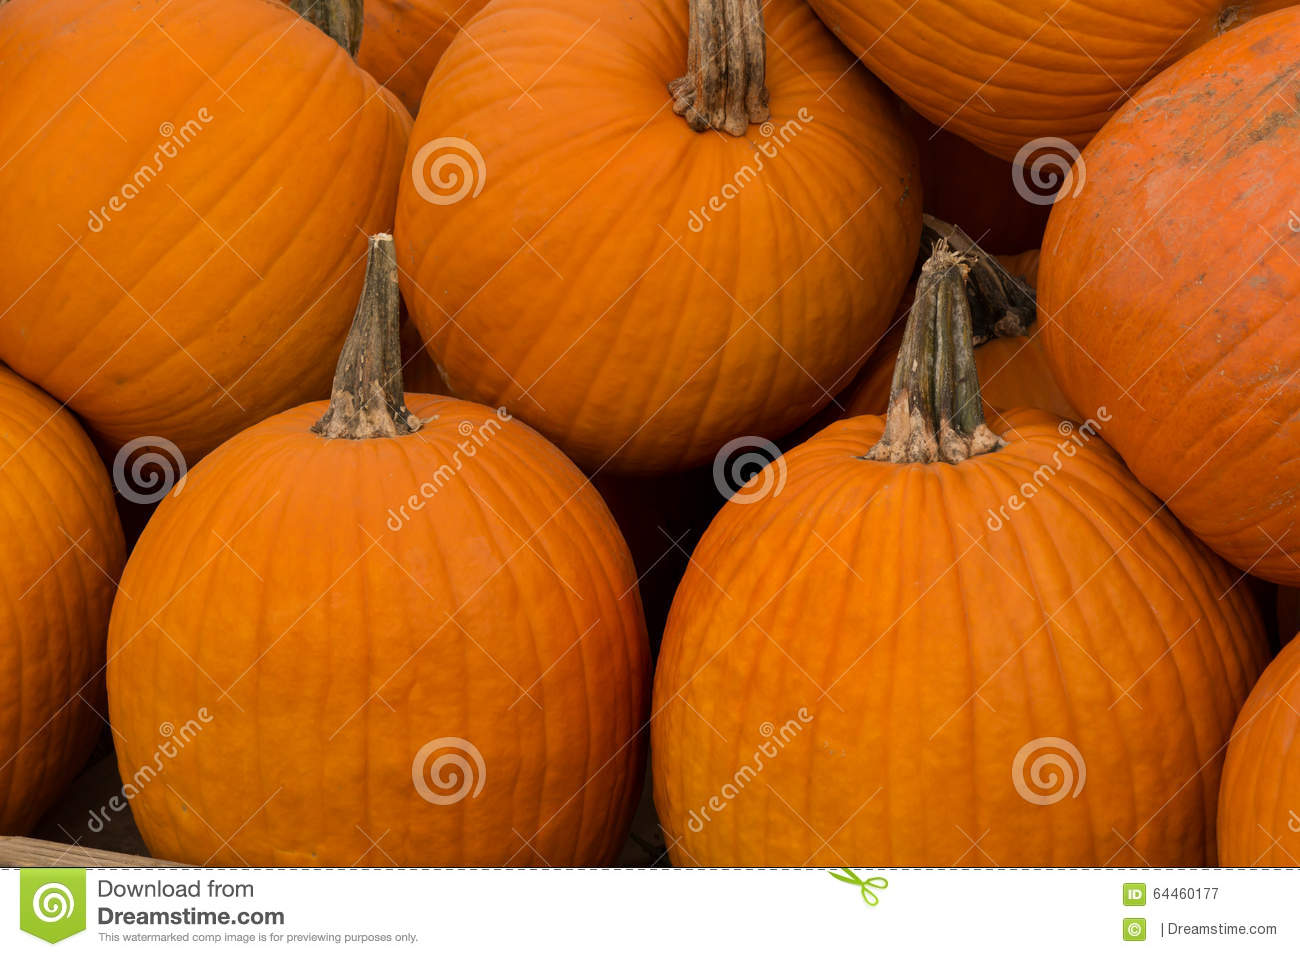 Stacked Pumpkins Stock Photo   Image  64460177